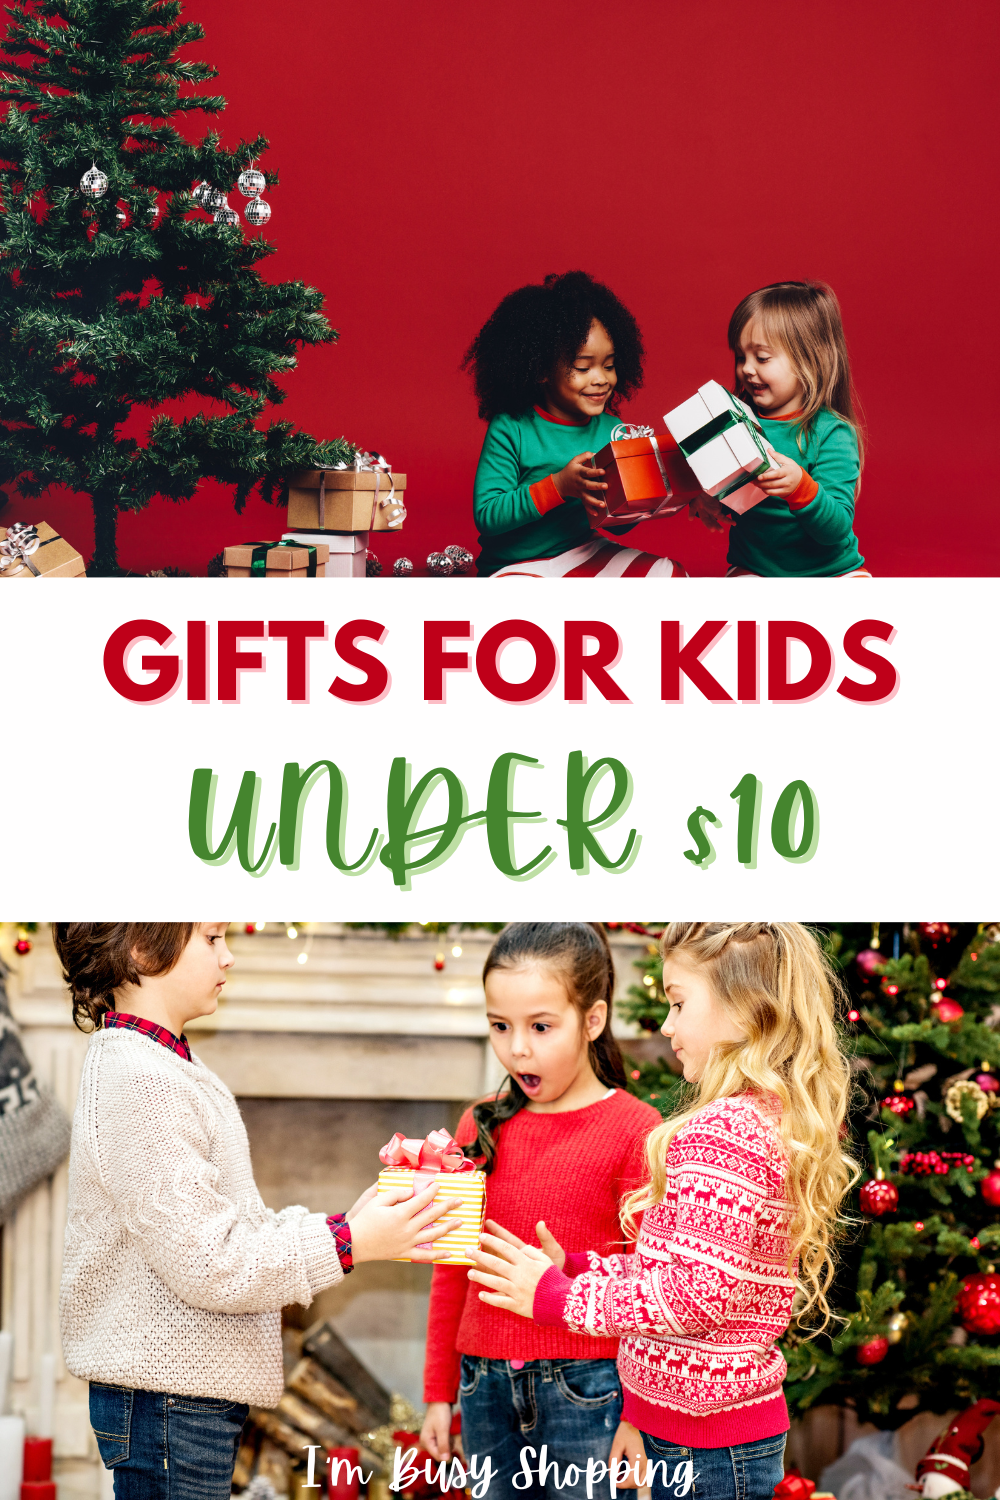 Pin image with title "Gifts for Kids Under $10" showing children exchanging gifts 